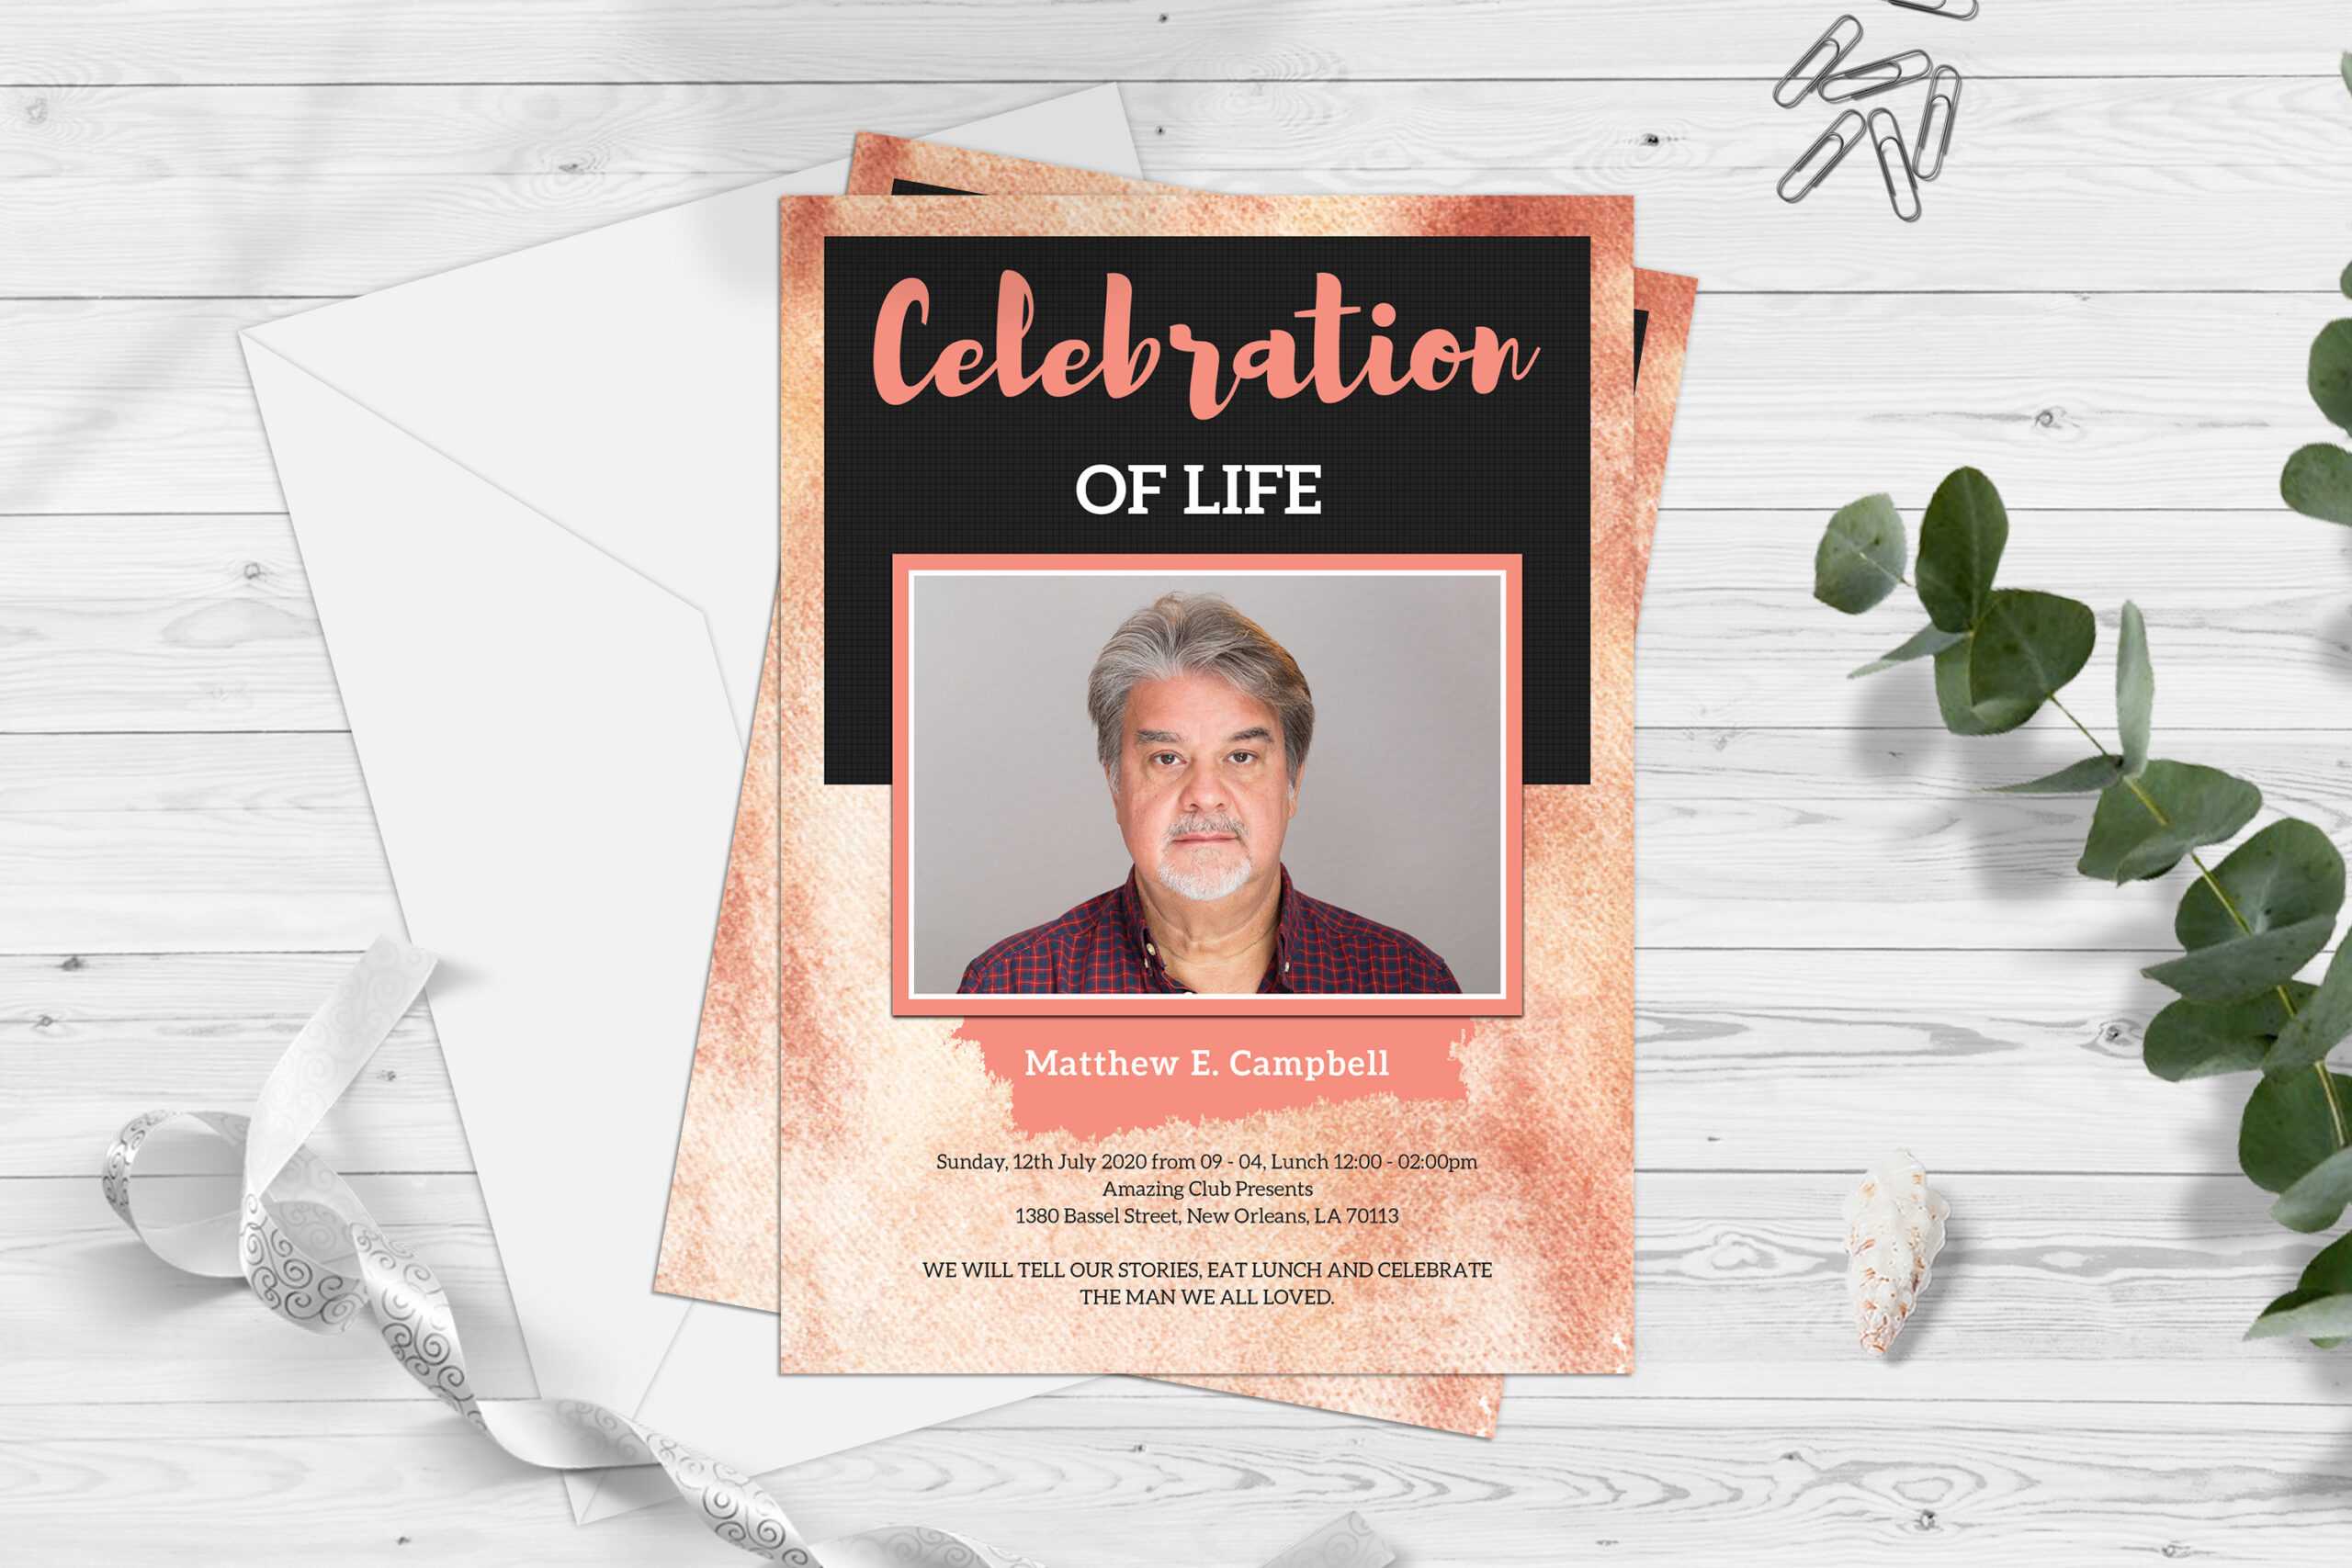 Celebration Of Life Funeral Program Invitation Card Template With Remembrance Cards Template Free